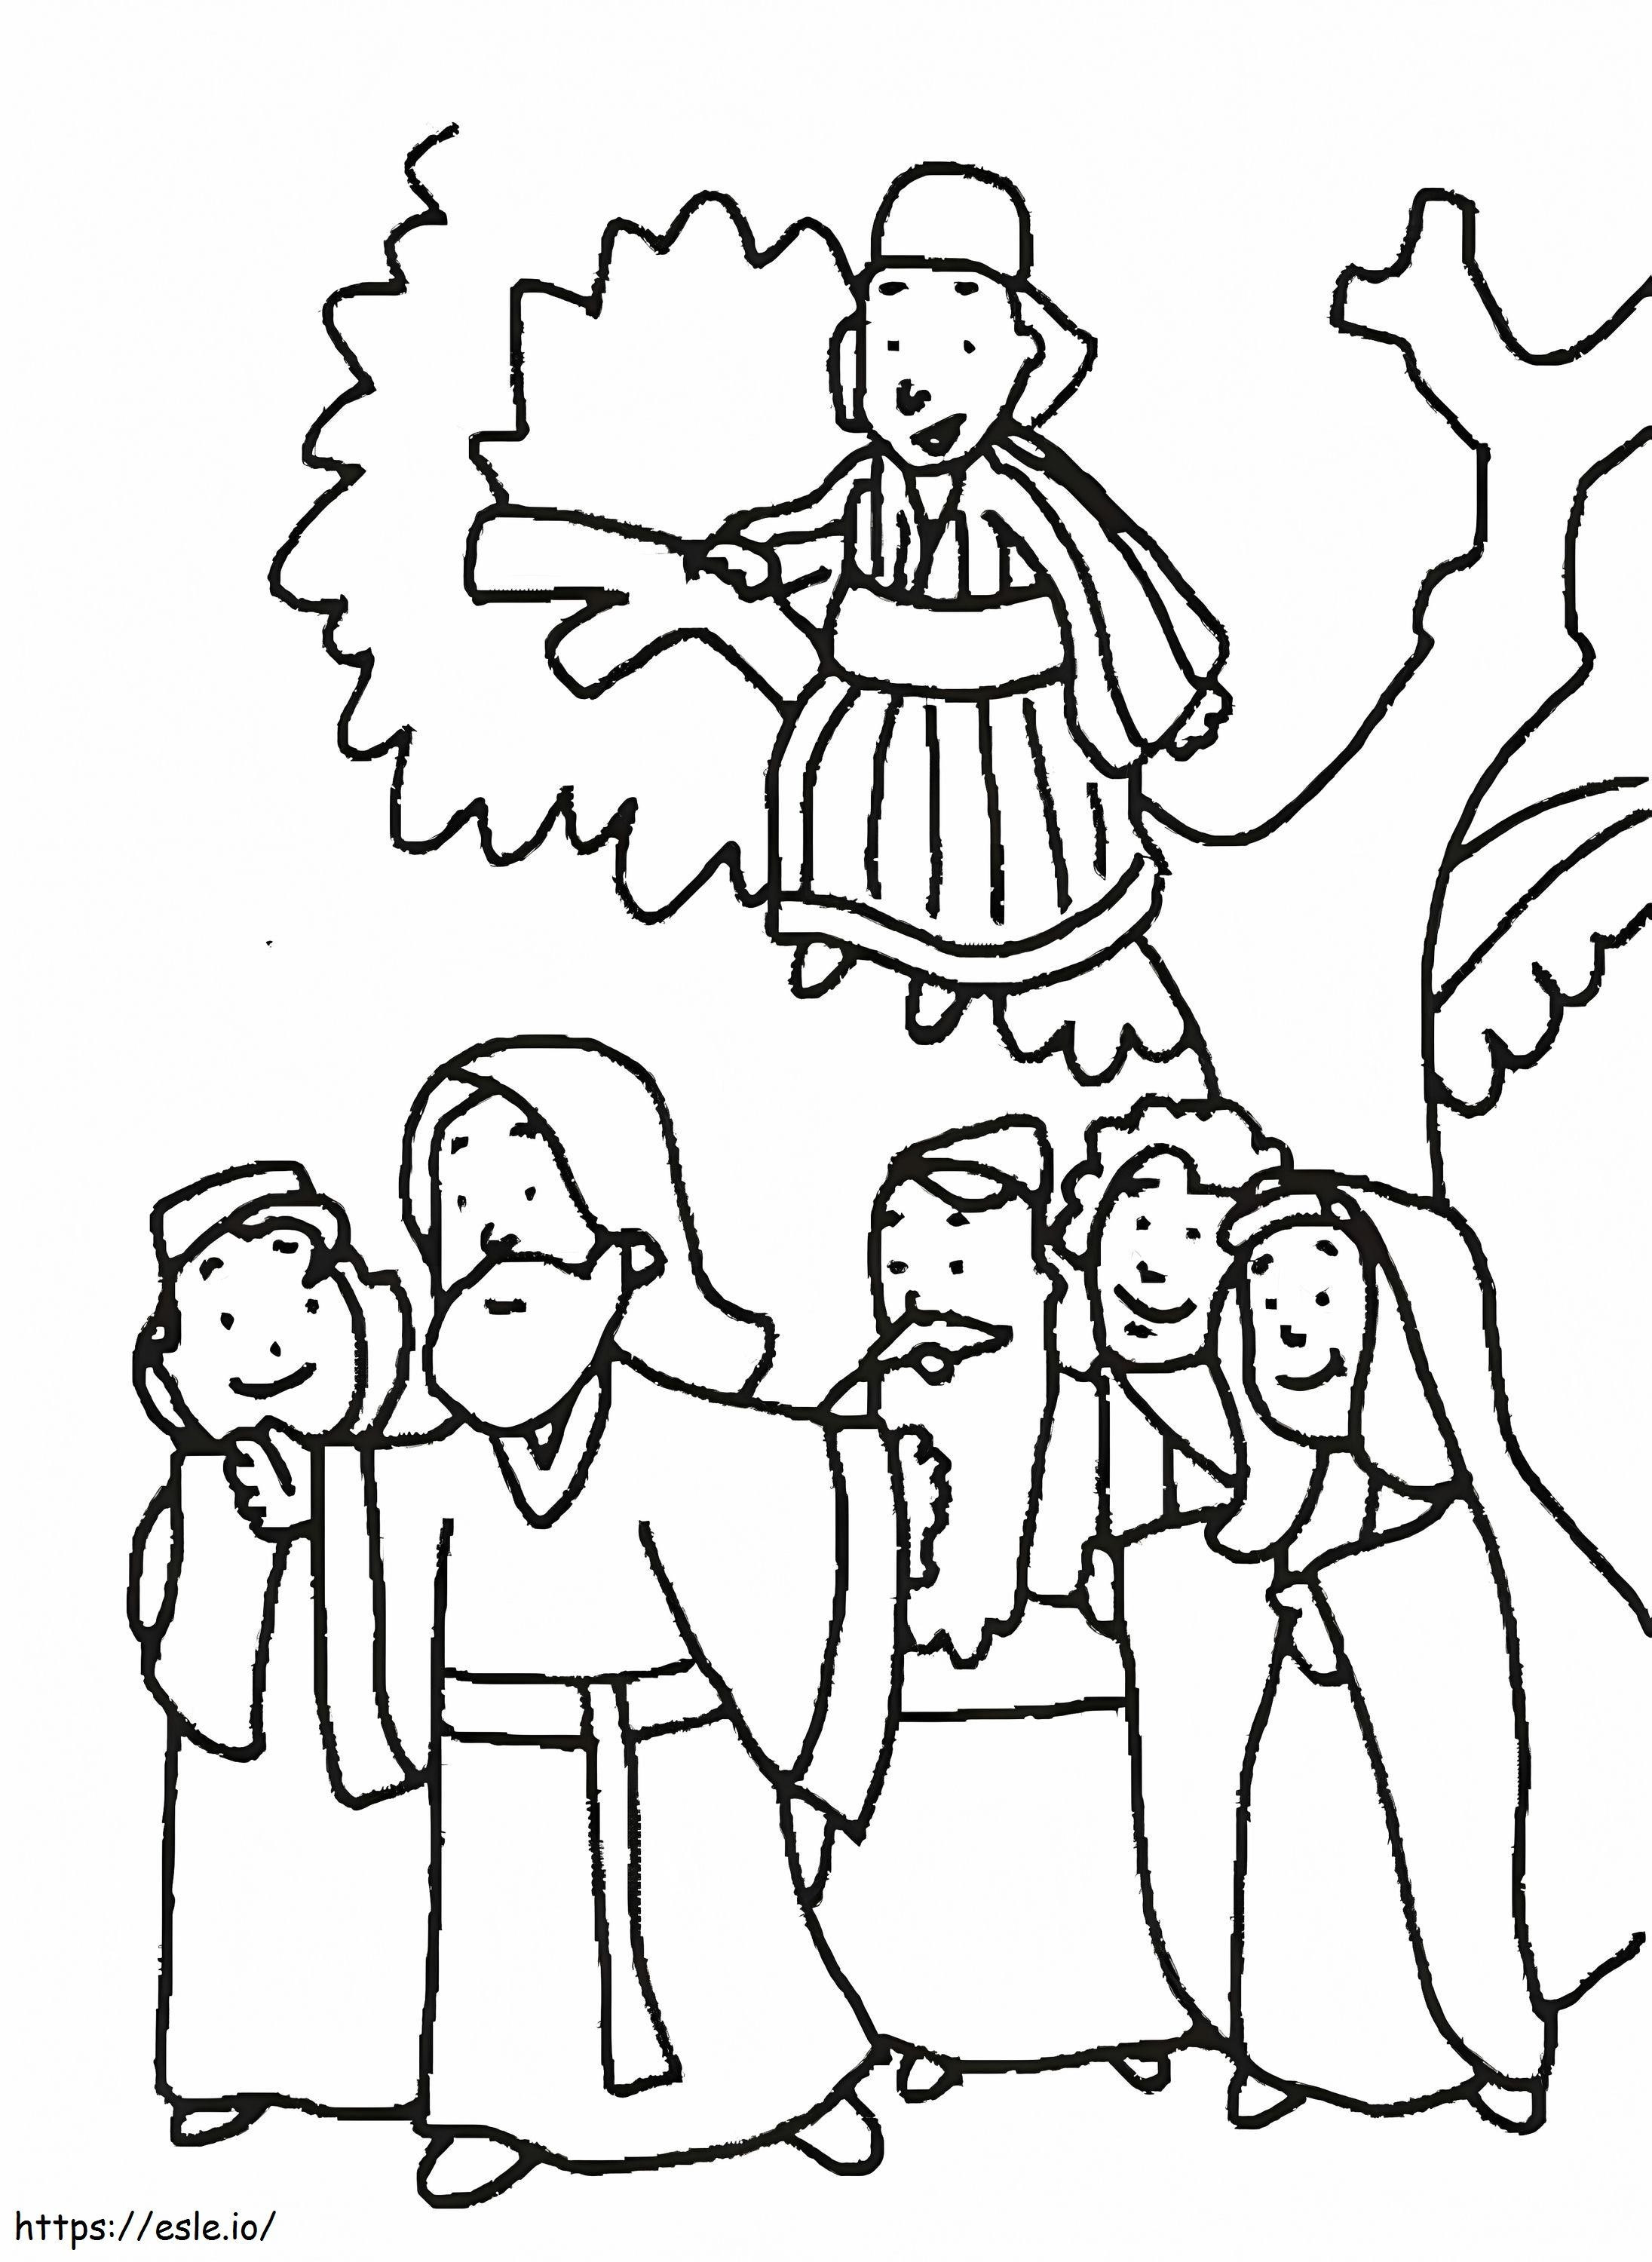 Zacchaeus On Tree And Drawing Of Jesus coloring page